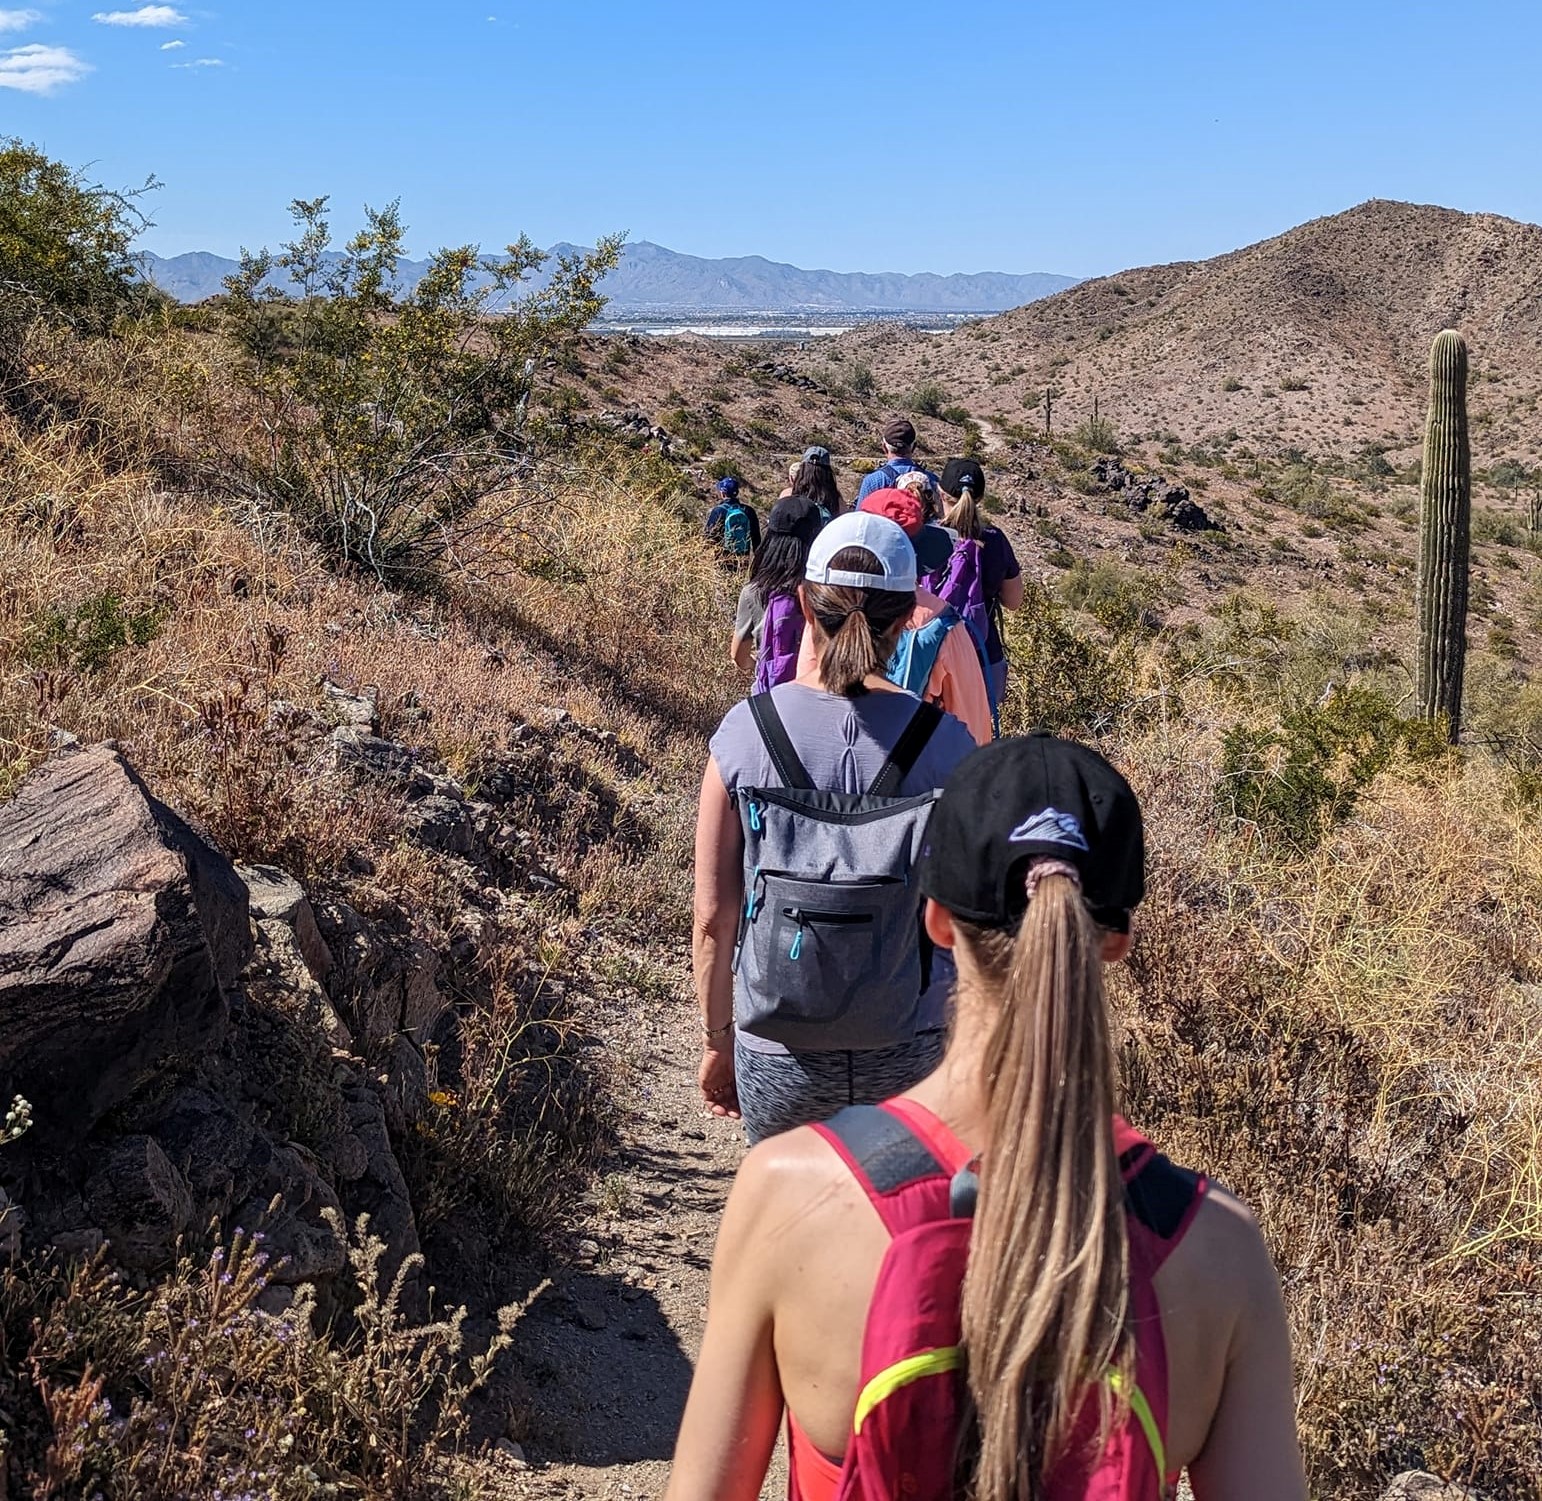 A Wild Bunch Desert Guides Phoenix hiking tours group makes its way along the trails recently. 